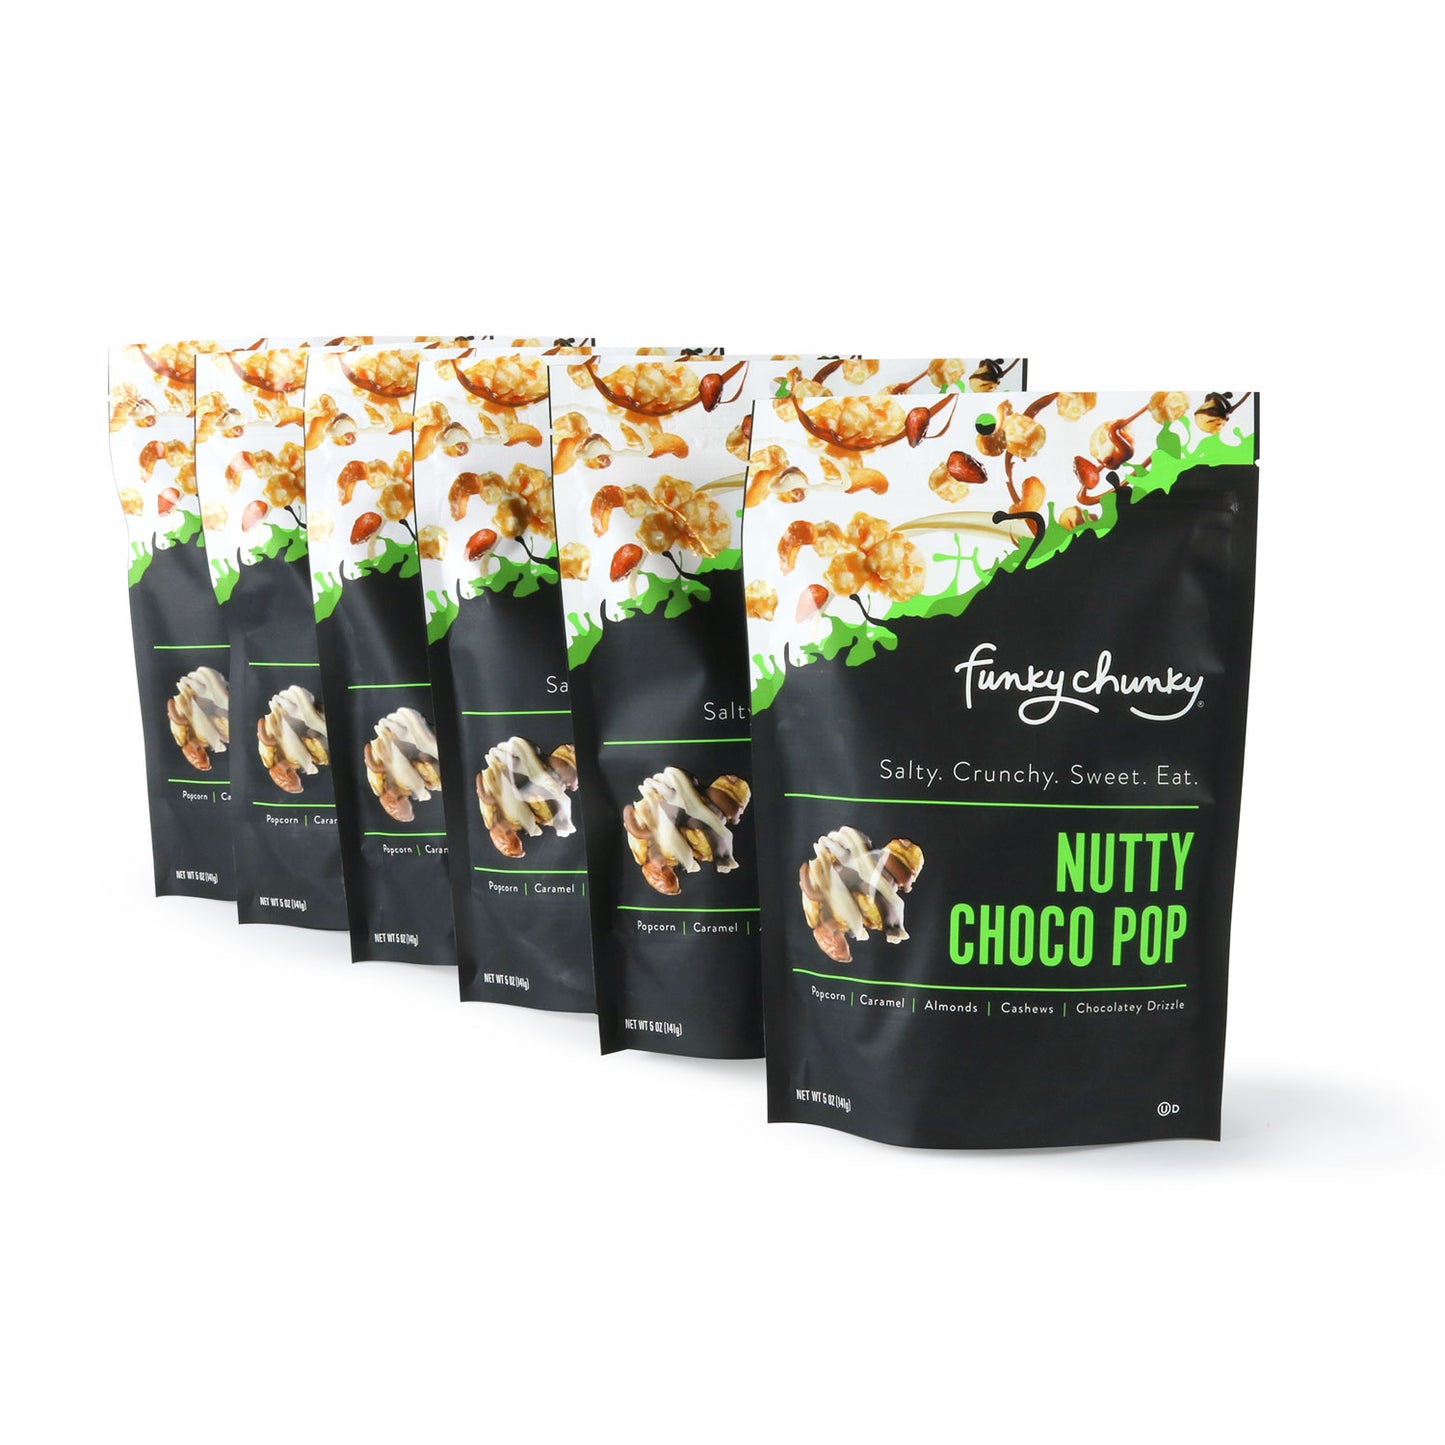 Large Bags | 5 oz - 6 pack-Large, re-sealable bags are the perfect size for stocking stuffers, office gifts or having on hand for drop-in guests. Each bag contains five servings. Includes six 5 ounce bags.-Funky Chunky